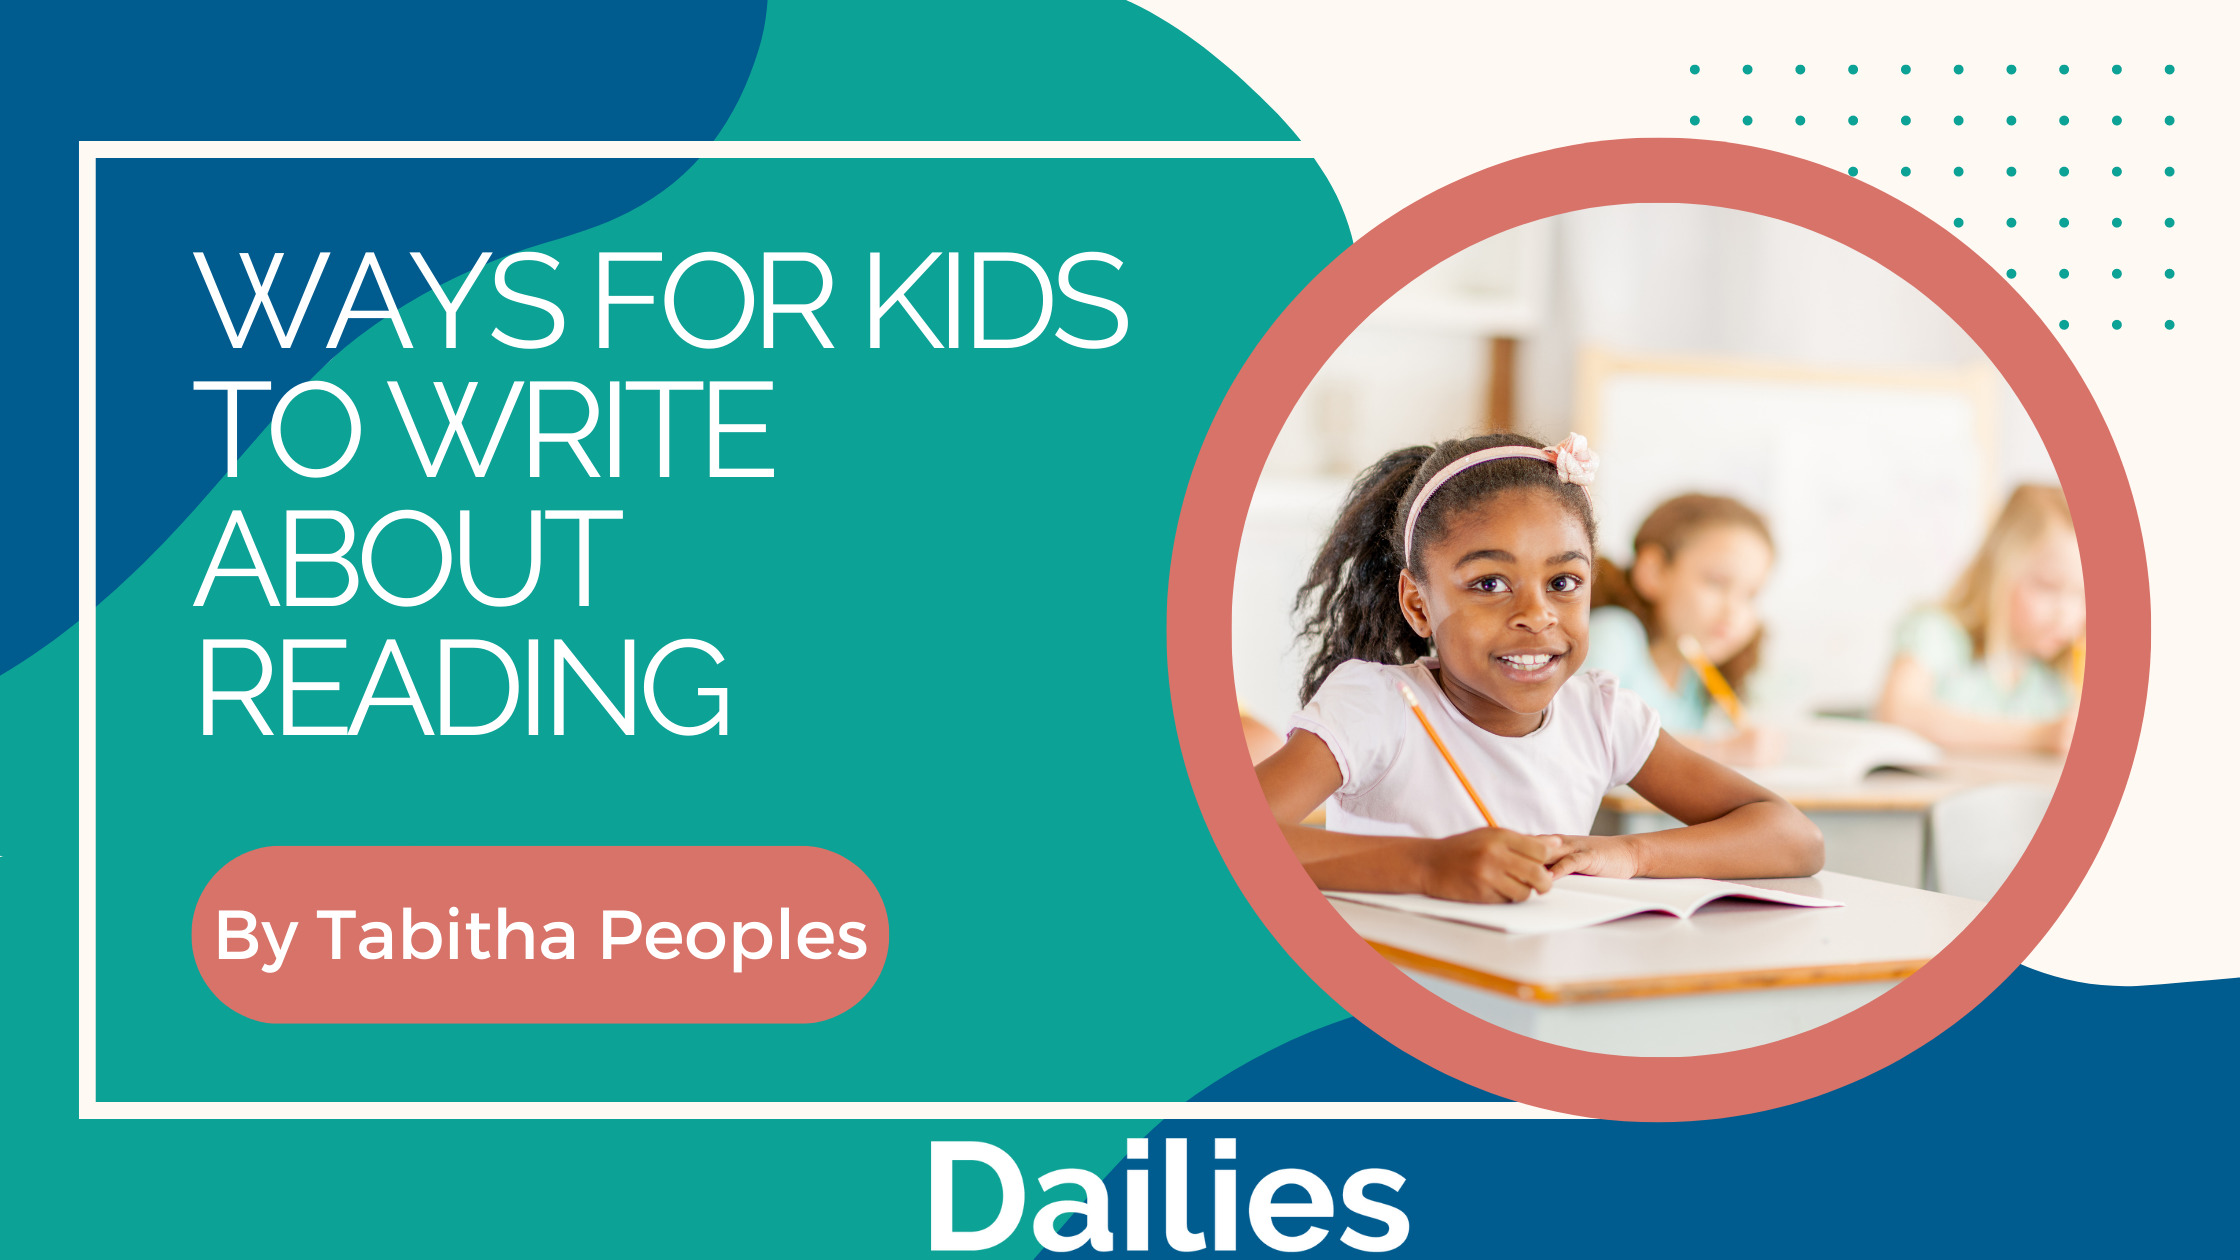 Ways for Kids to Write About Reading